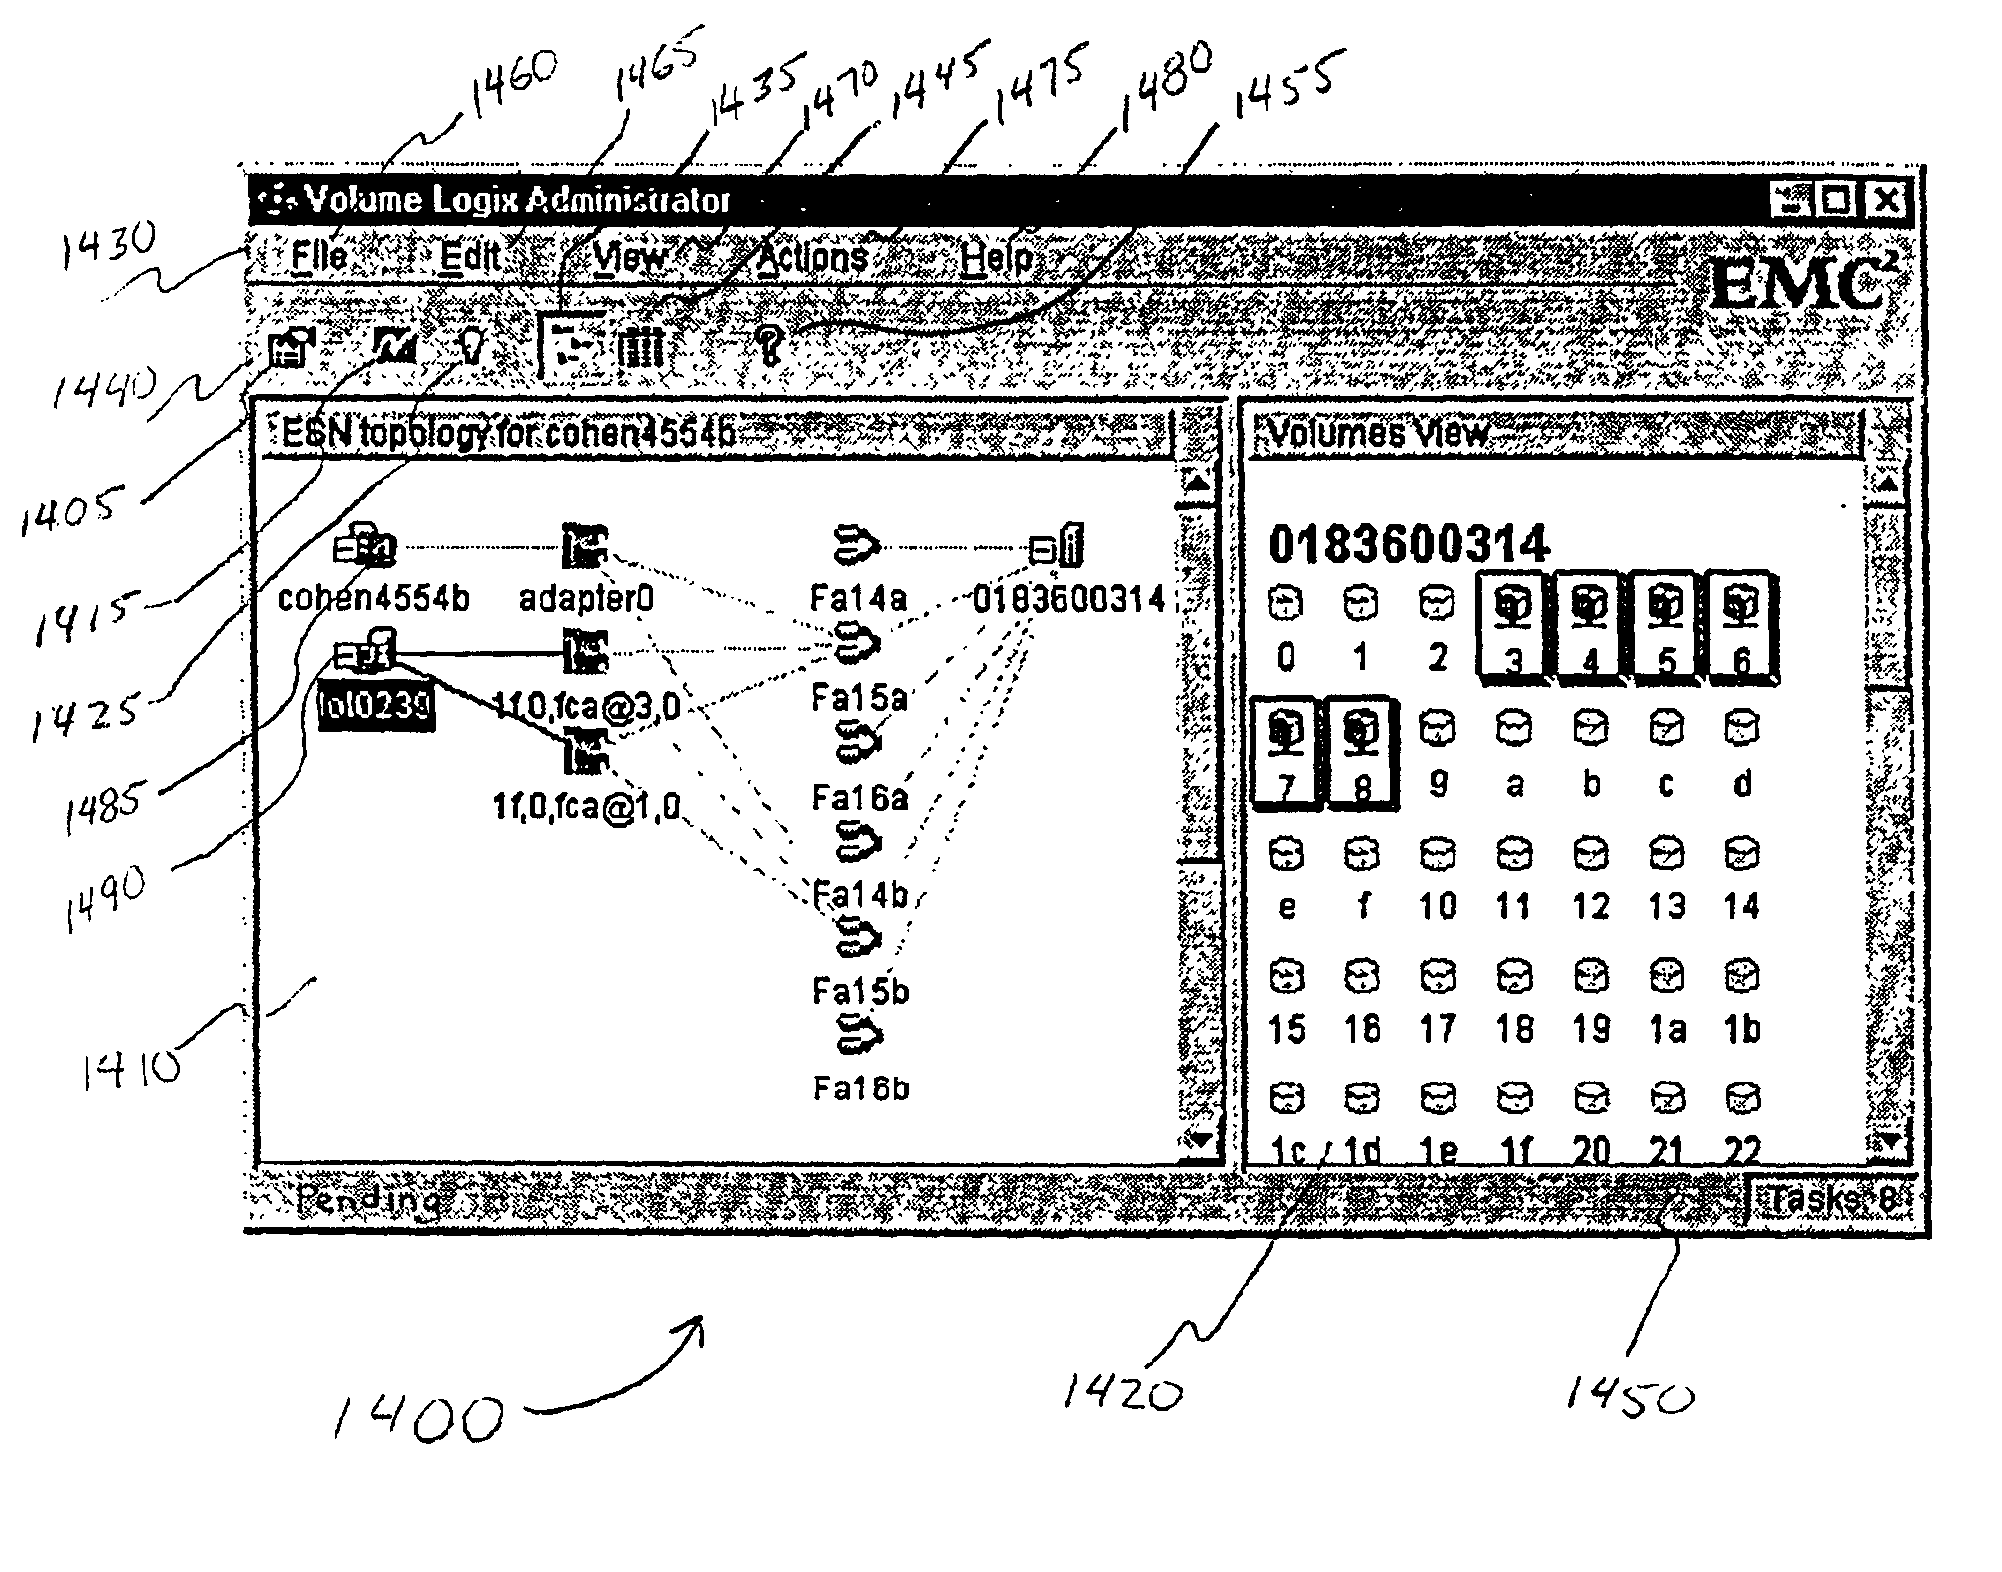 User interface for managing storage in a storage system coupled to a network